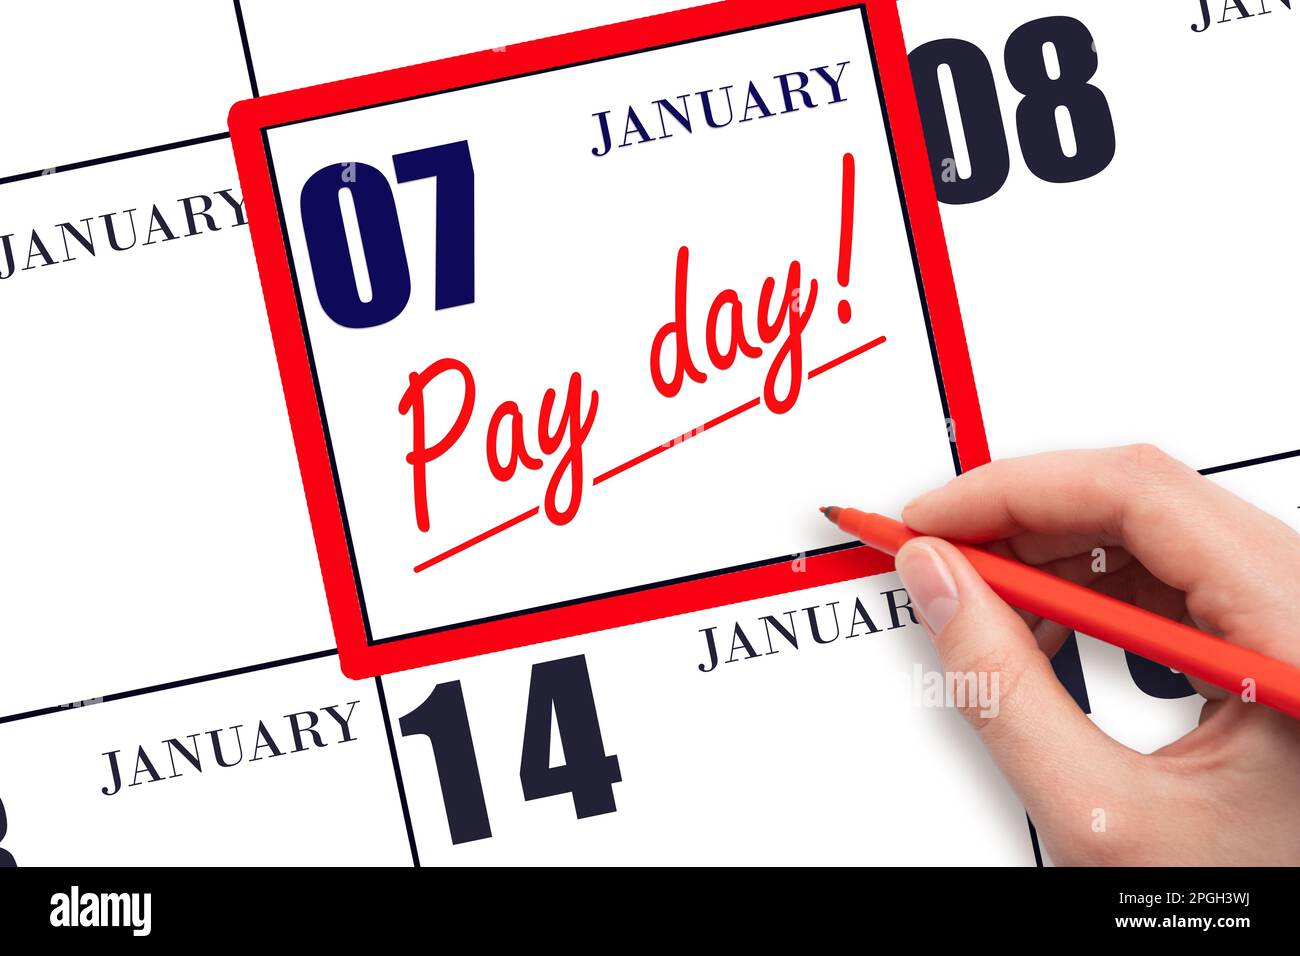 7th day of January. Hand writing text PAY DATE on calendar date January 7 and underline it. Payment due date. Reminder concept of payment. Winter mont Stock Photo